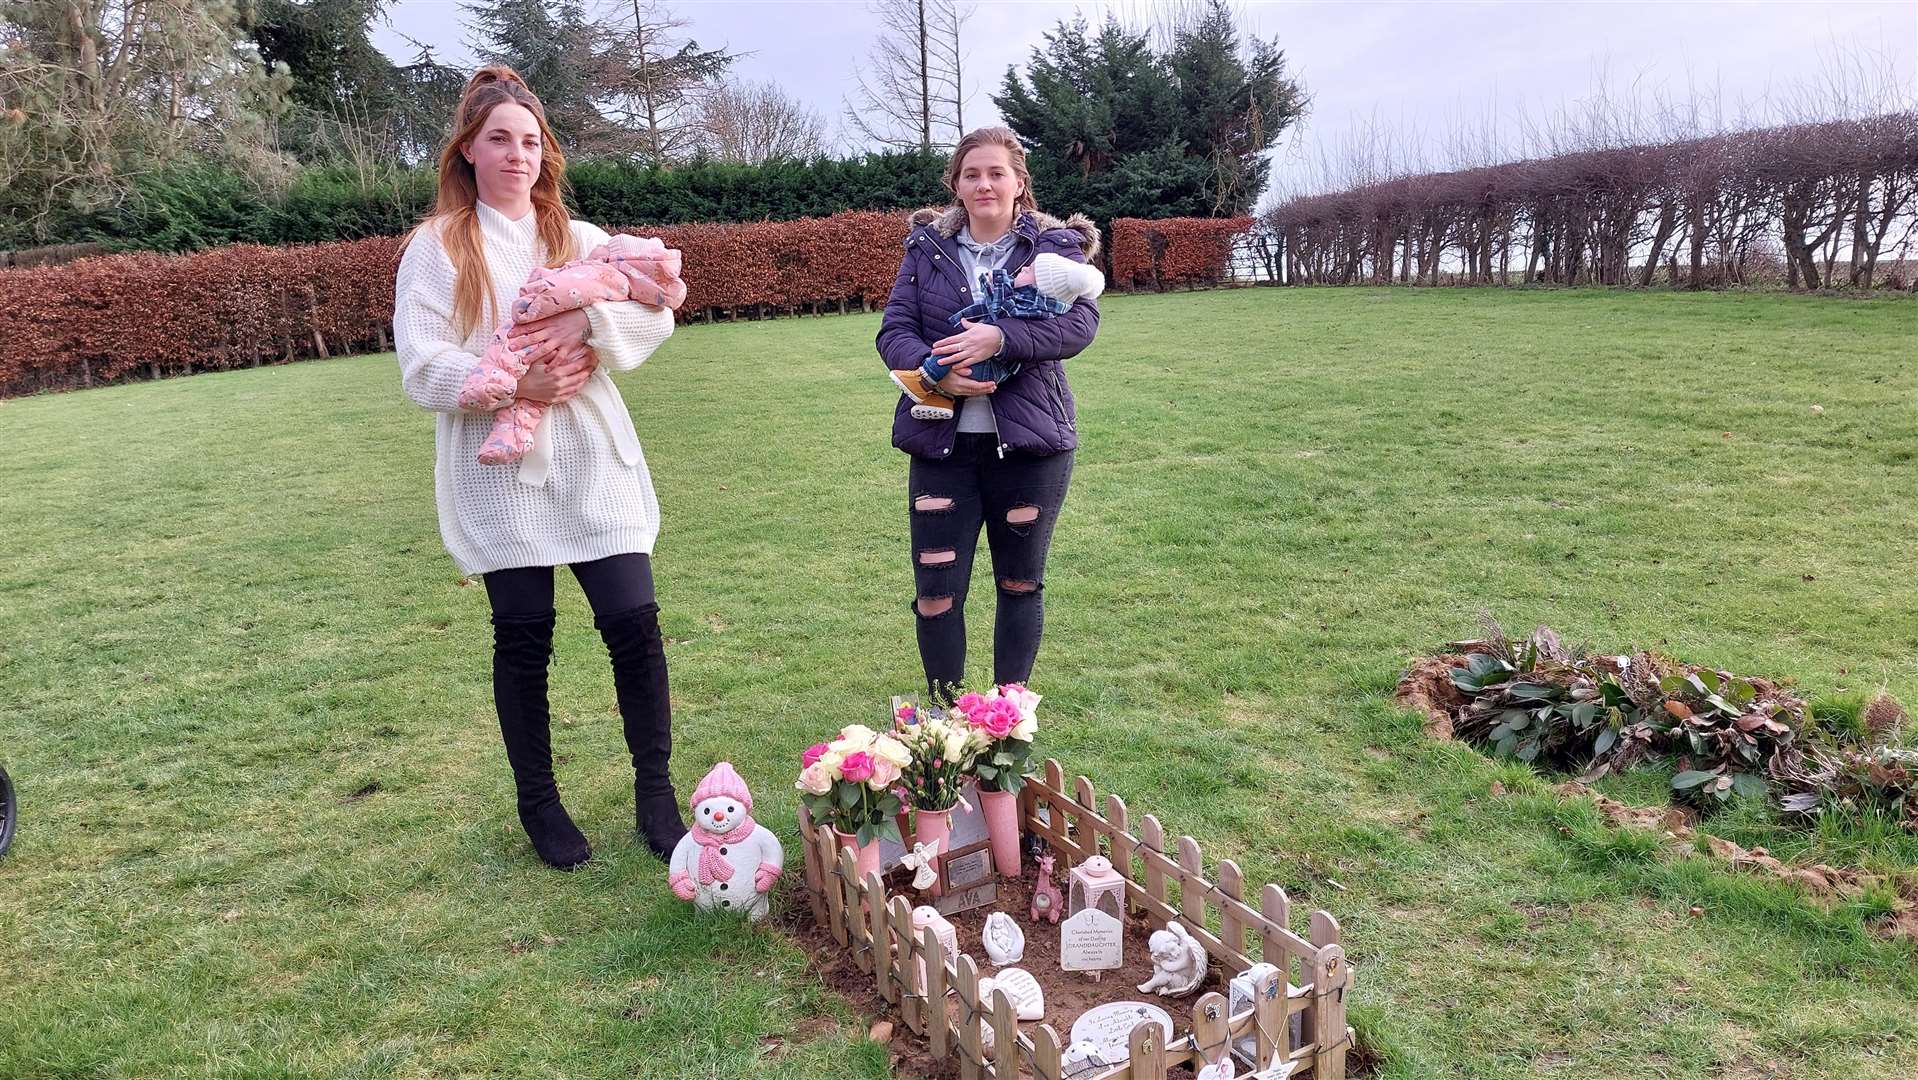 Carys Berry and Abigail White say they were shocked after receiving a letter asking them to remove decorations from their babies' graves in Boughton-under-Blean